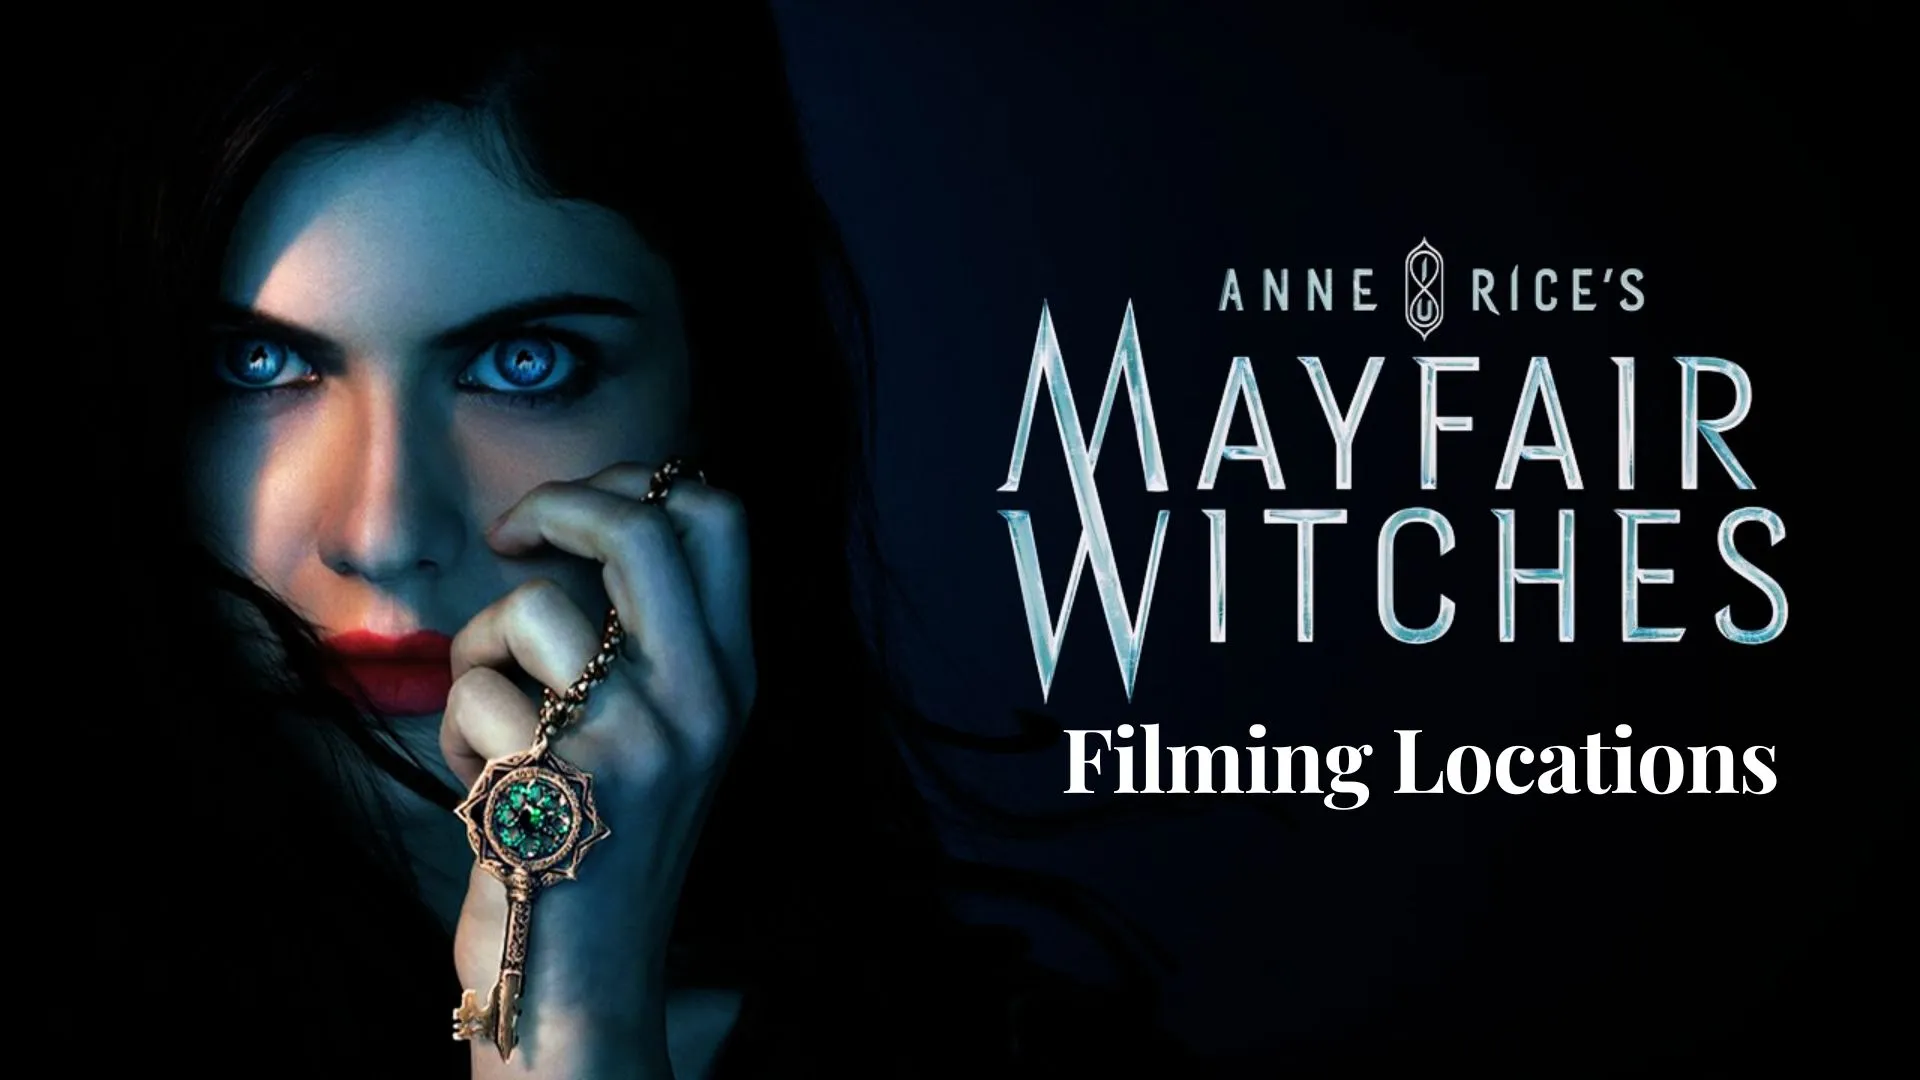 Anne Rice's Mayfair Witches Filming Locations